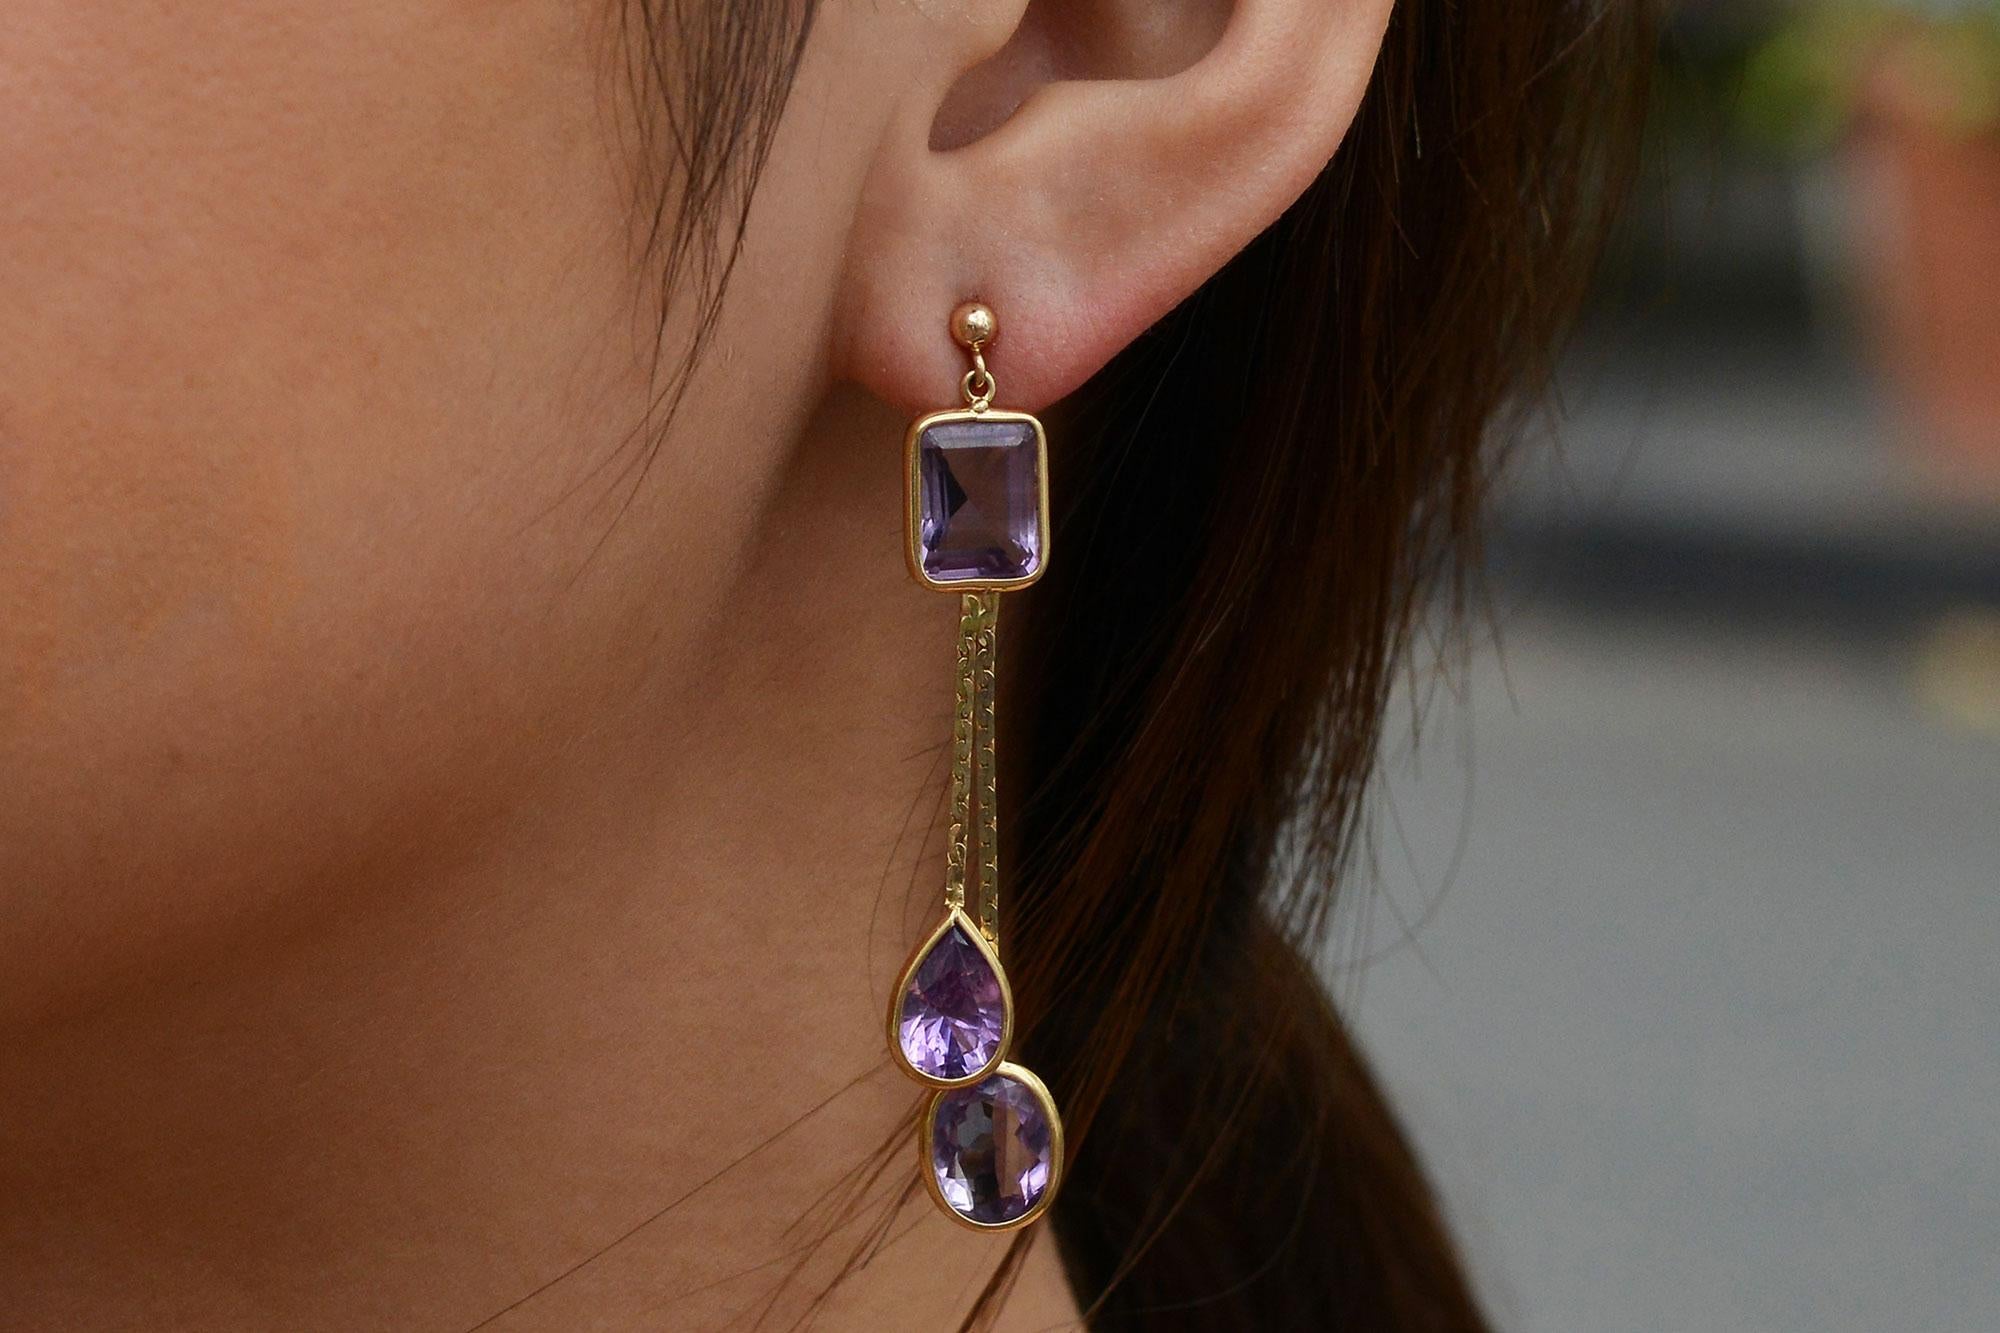 These exquisite dangle earrings are an estate treasure, boasting unique, vibrant lilac amethysts set in 14 karat yellow gold, making them an affordable and sustainable option for the luxury-minded. The interesting, geometric motif features an